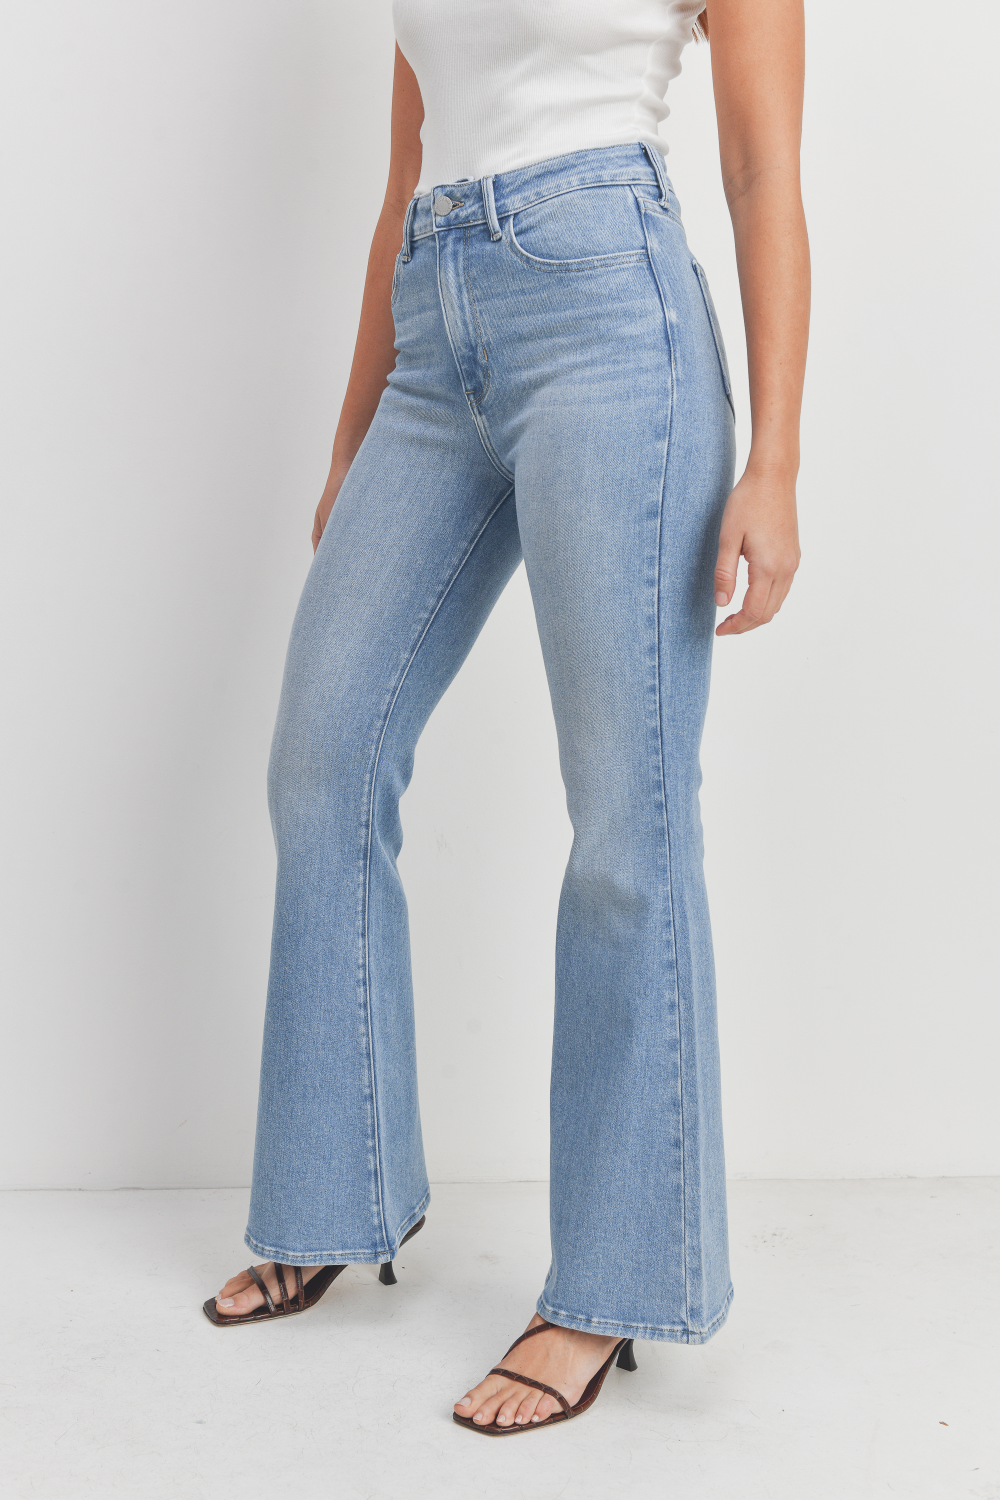 Moon City - High Waist Flared Jeans | YesStyle